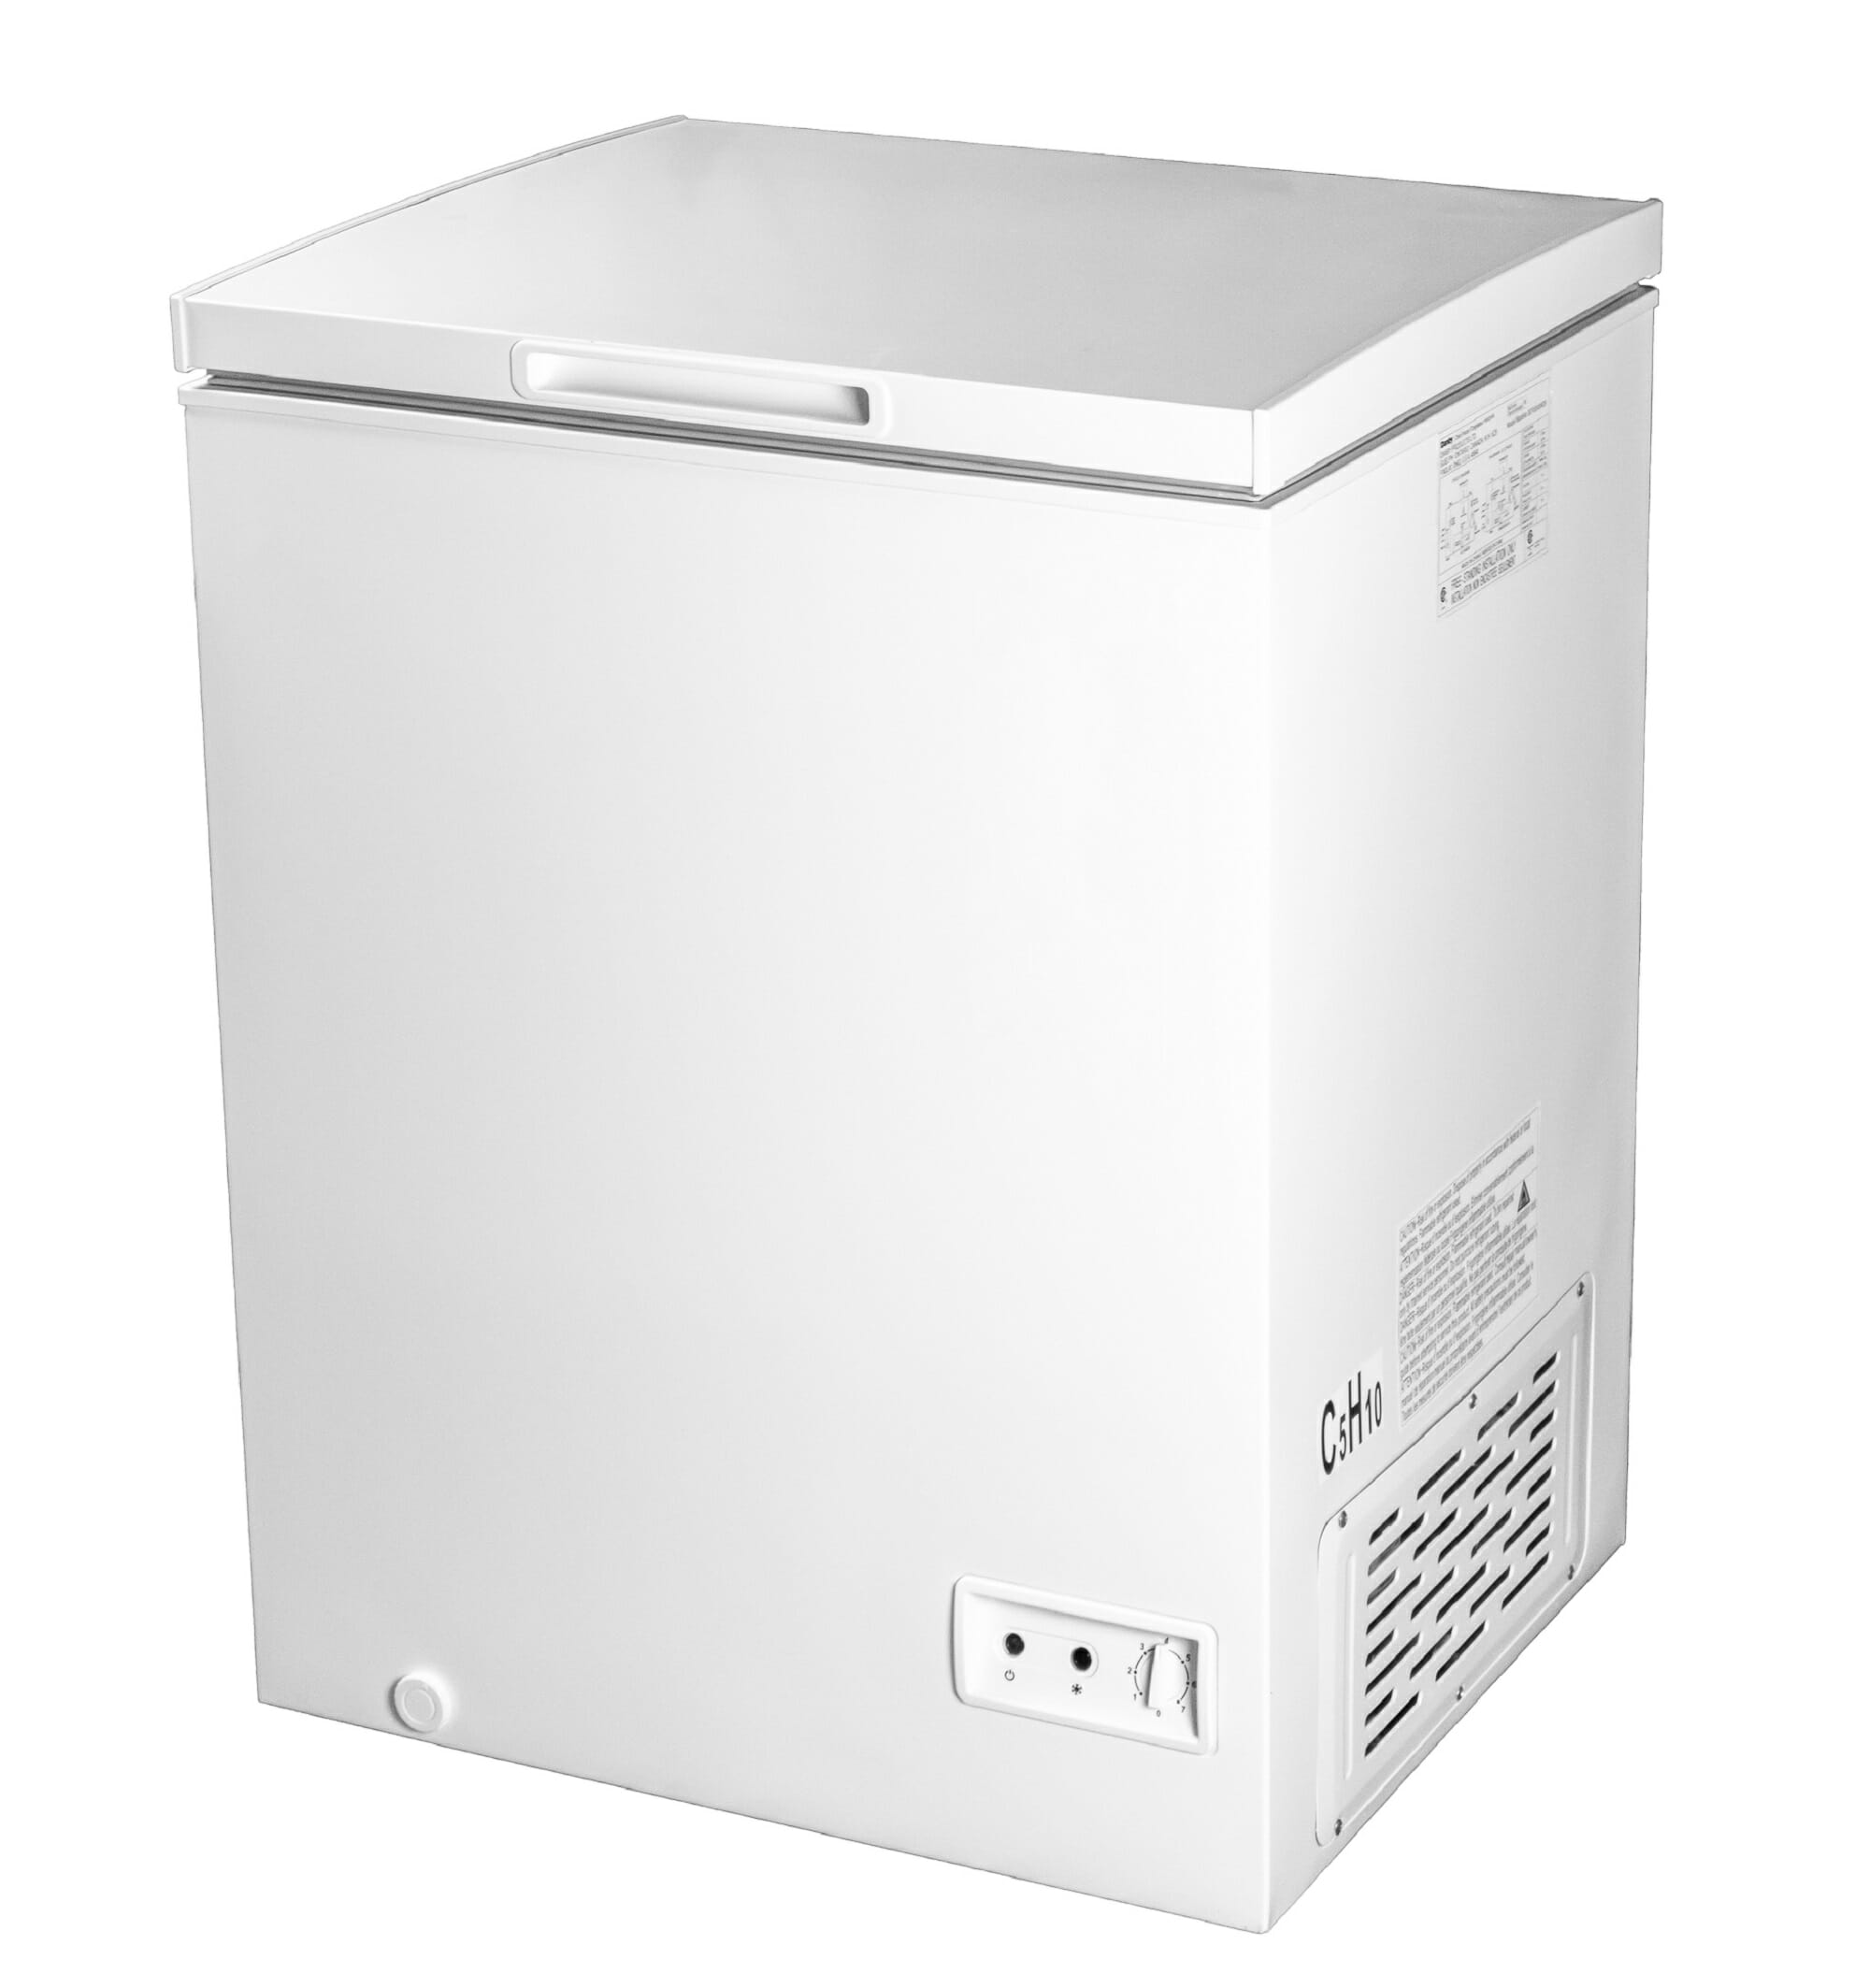 Danby - 5 cu. Ft  Chest Freezer in White - DCF050A5WDB